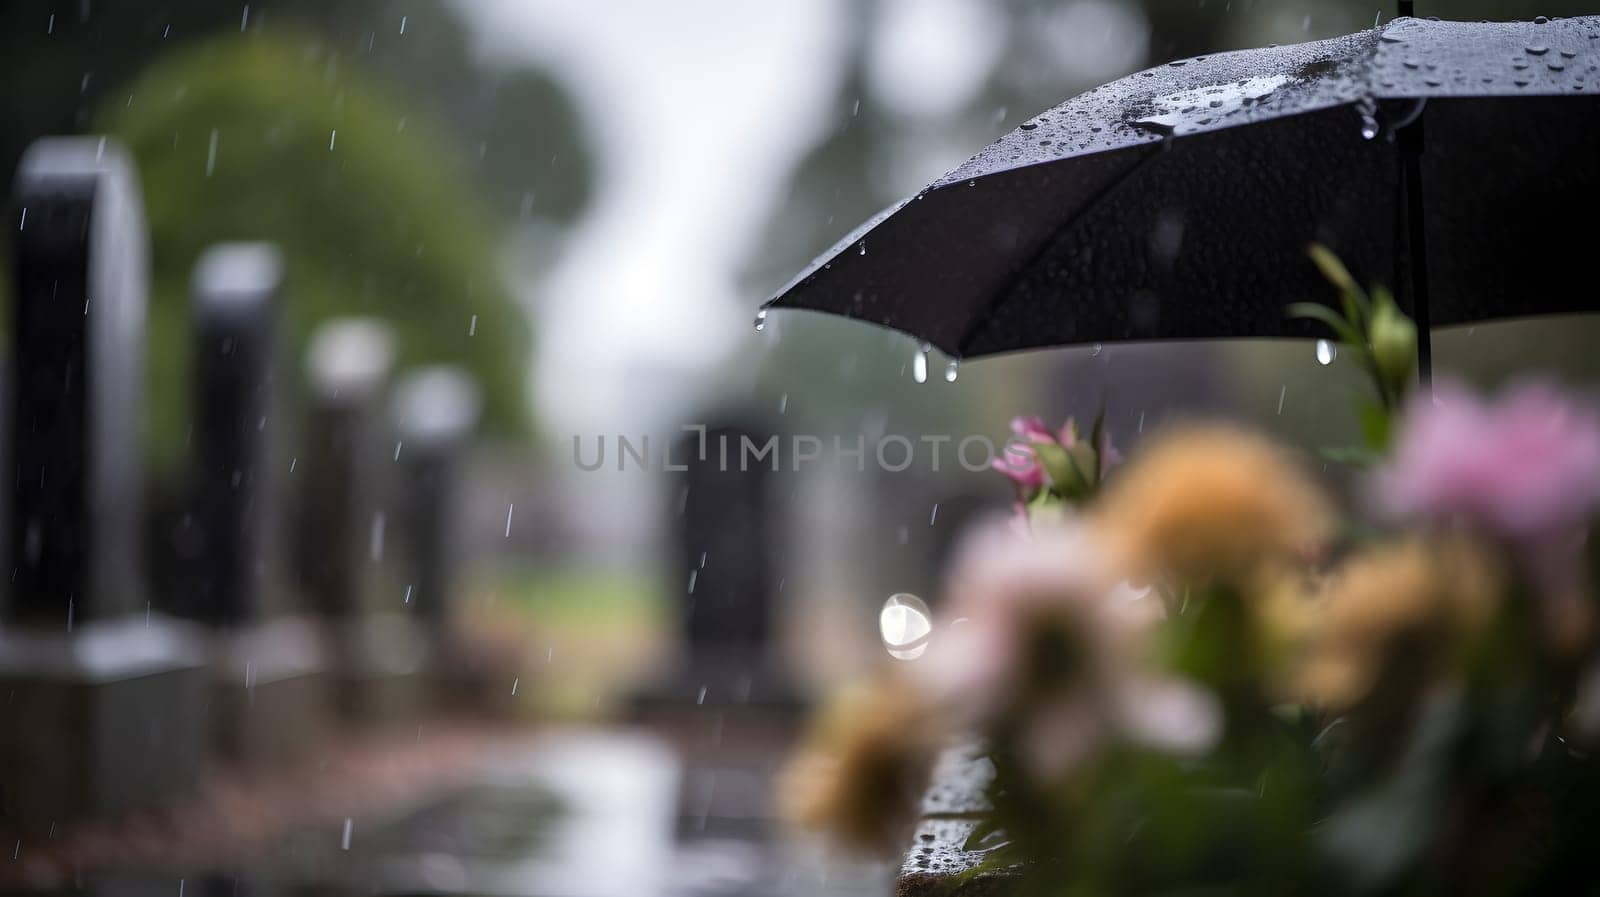 rainy funeral with bokeh, neural network generated photorealistic image by z1b